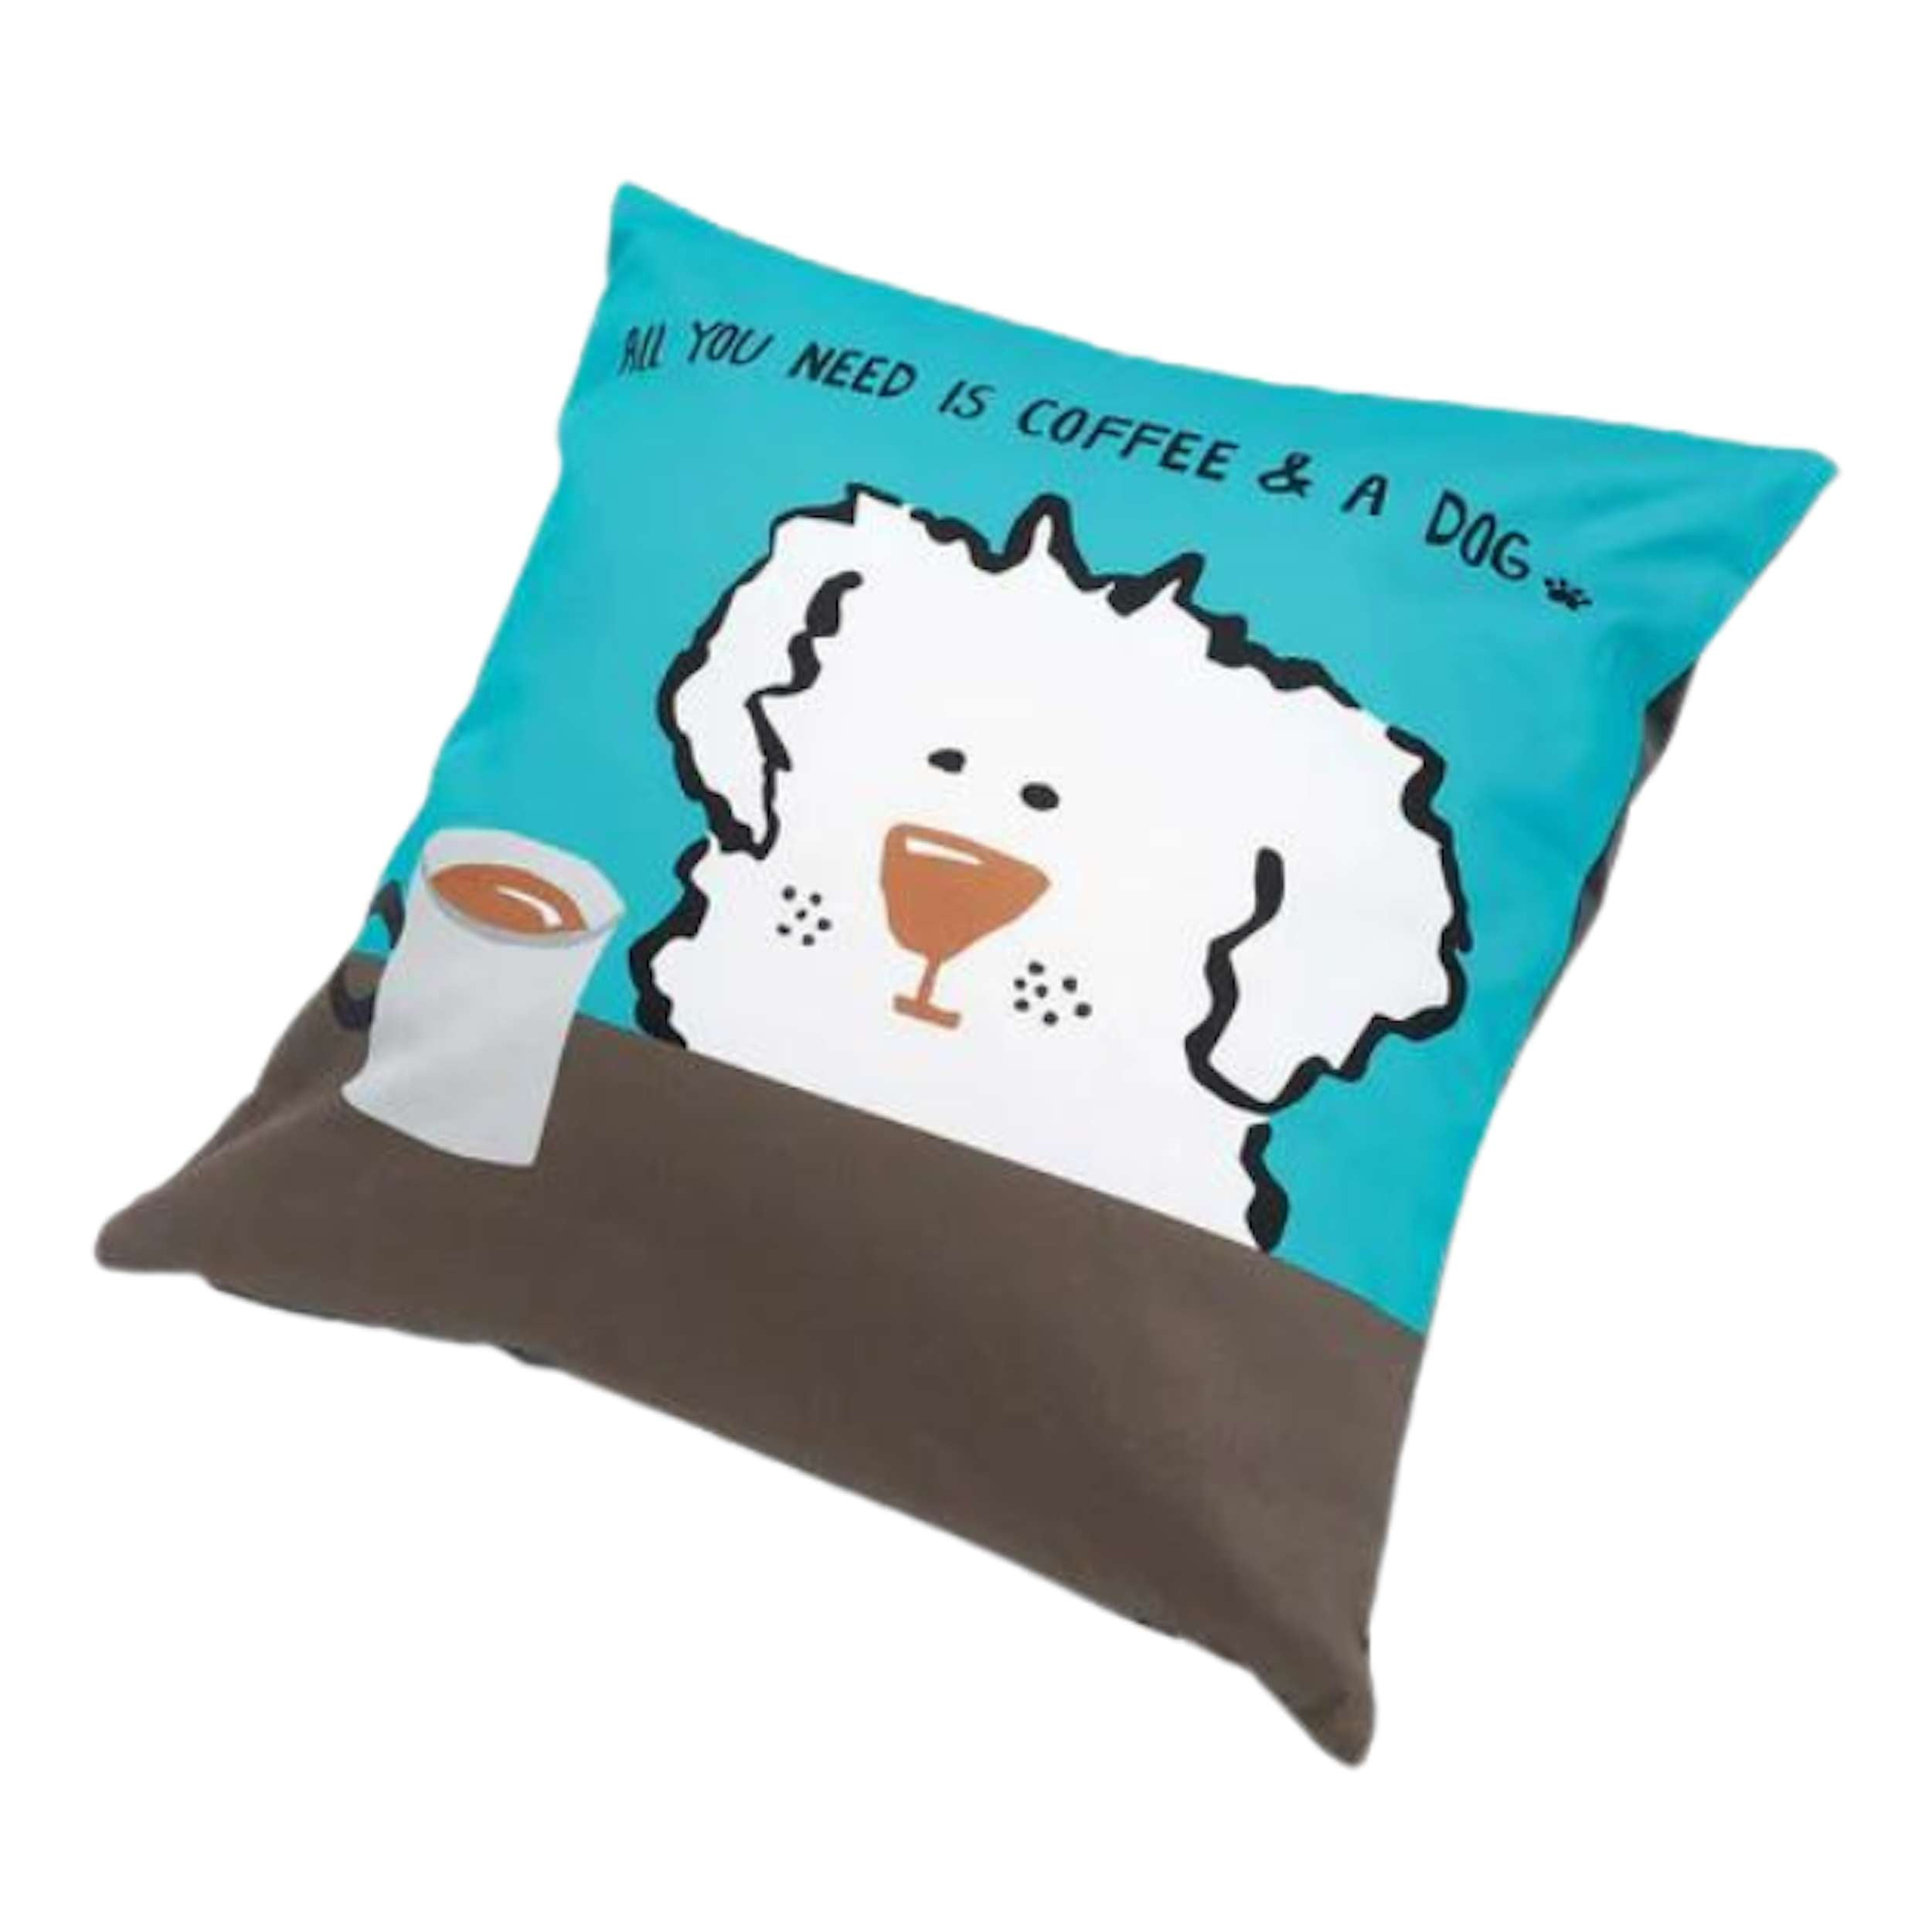 ALL-YOU-NEED-IS-COFFEE-AND-A-DOG-ACCENT-THROW-DOG-PILLOW